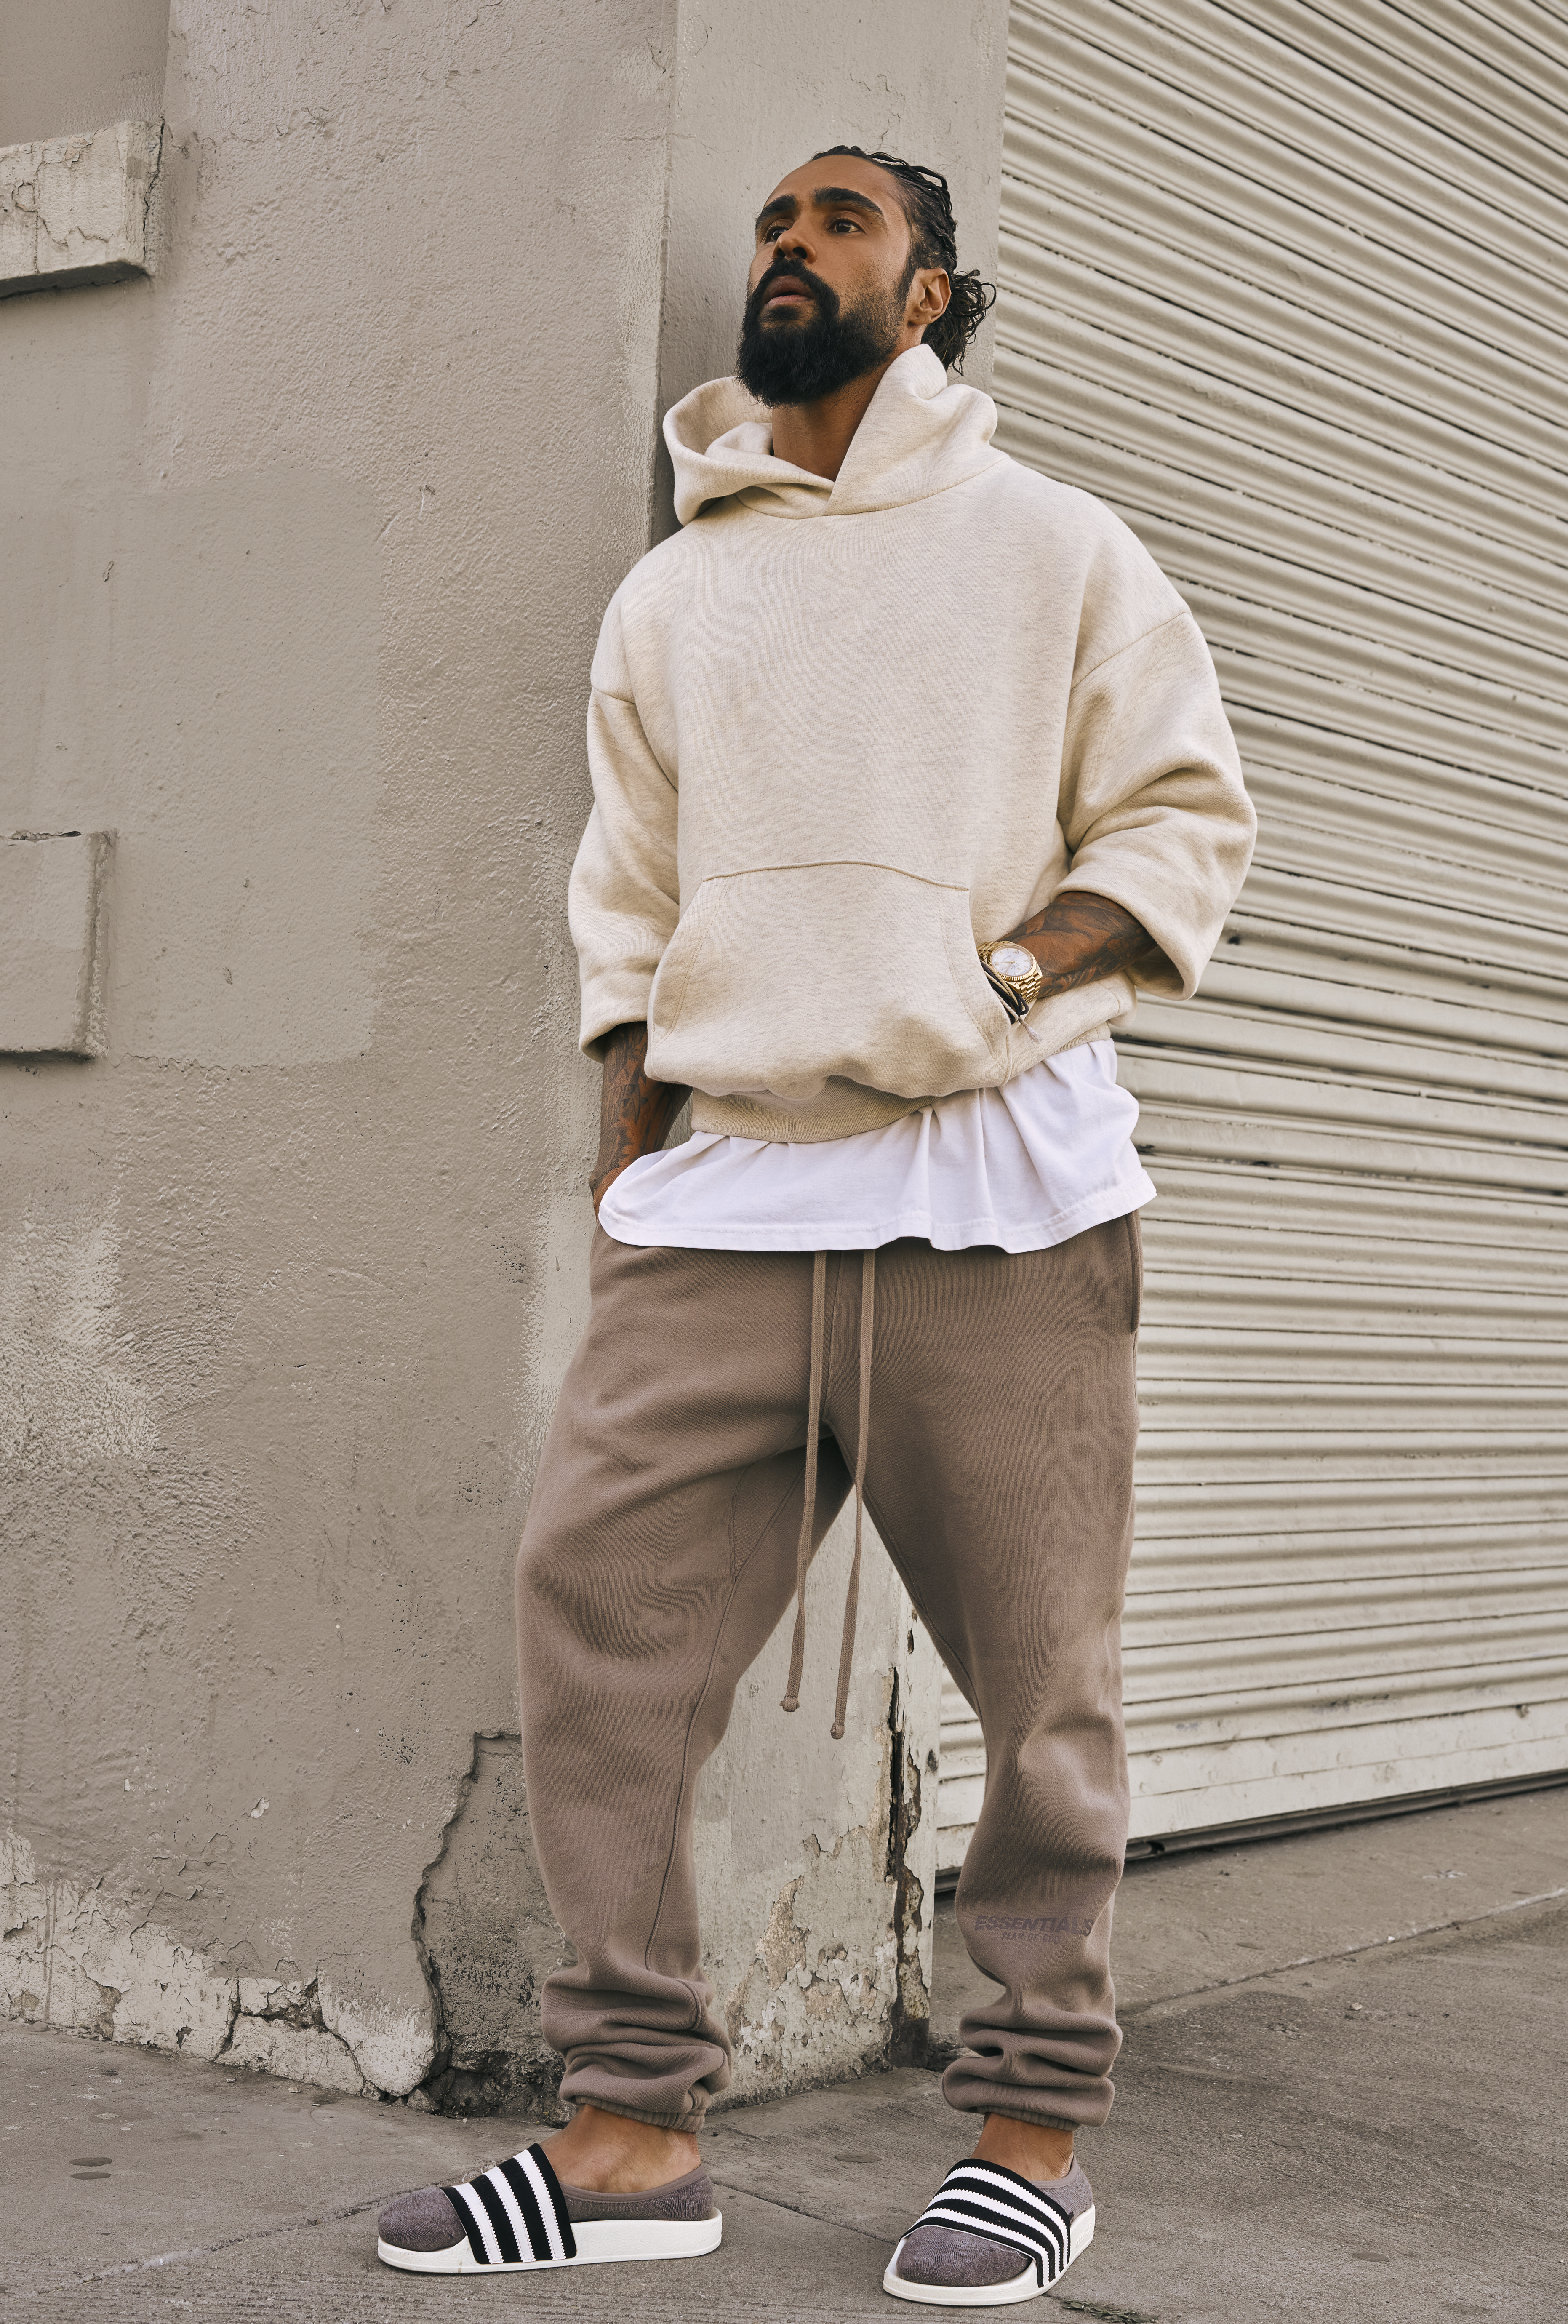 100 Jerry lorenzo style ideas  mens street style, mens outfits, mens  streetwear